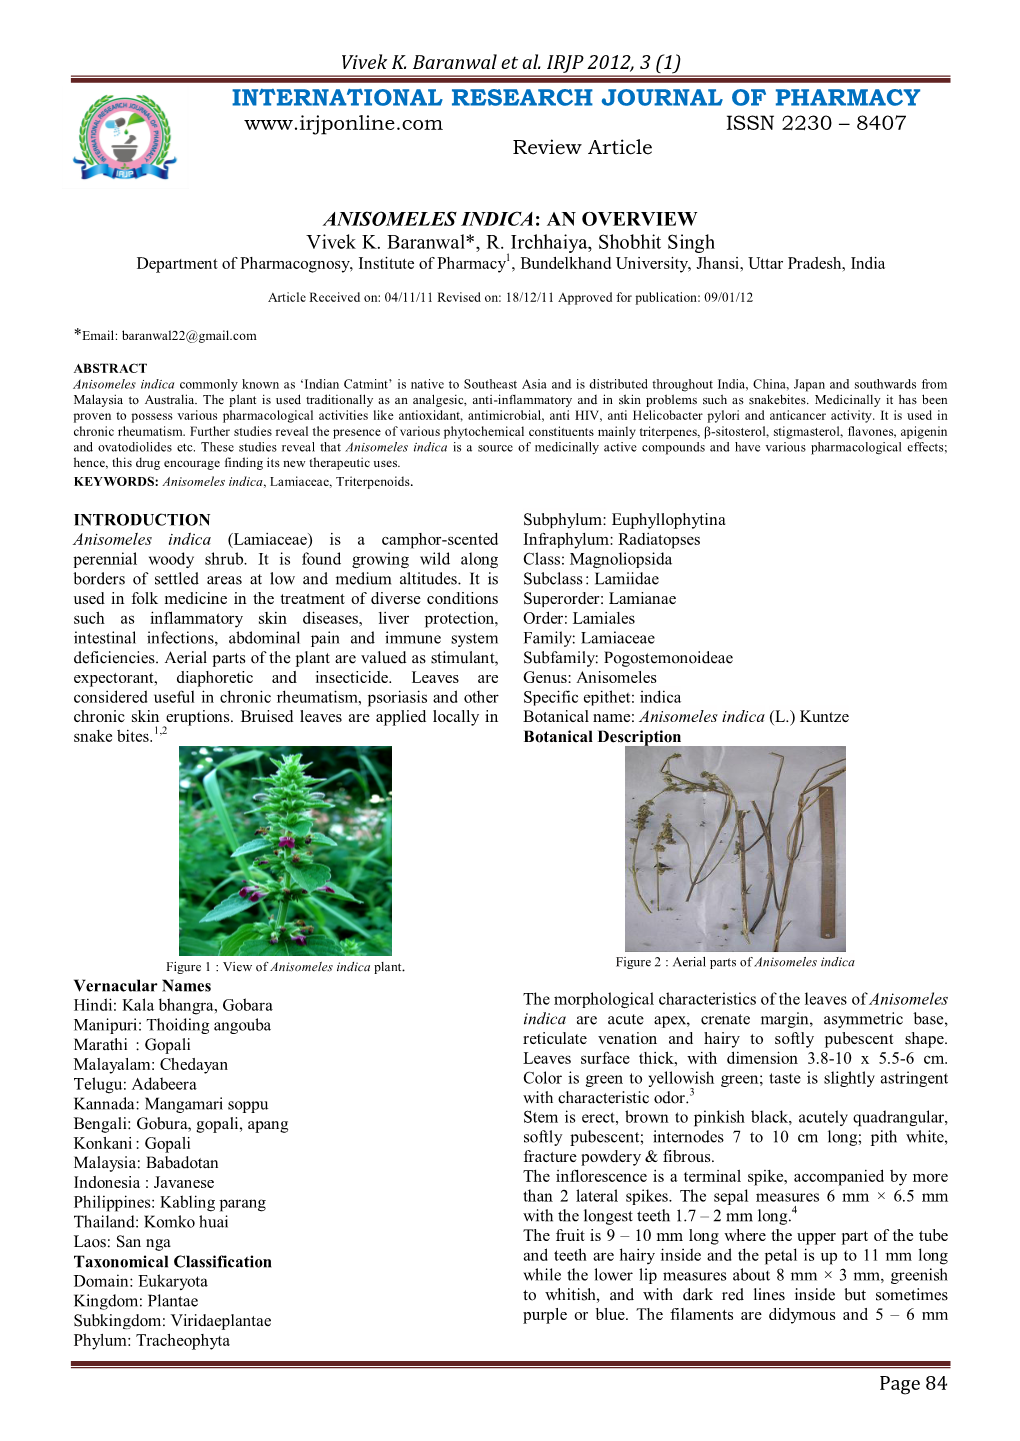 ANISOMELES INDICA: an OVERVIEW Vivek K